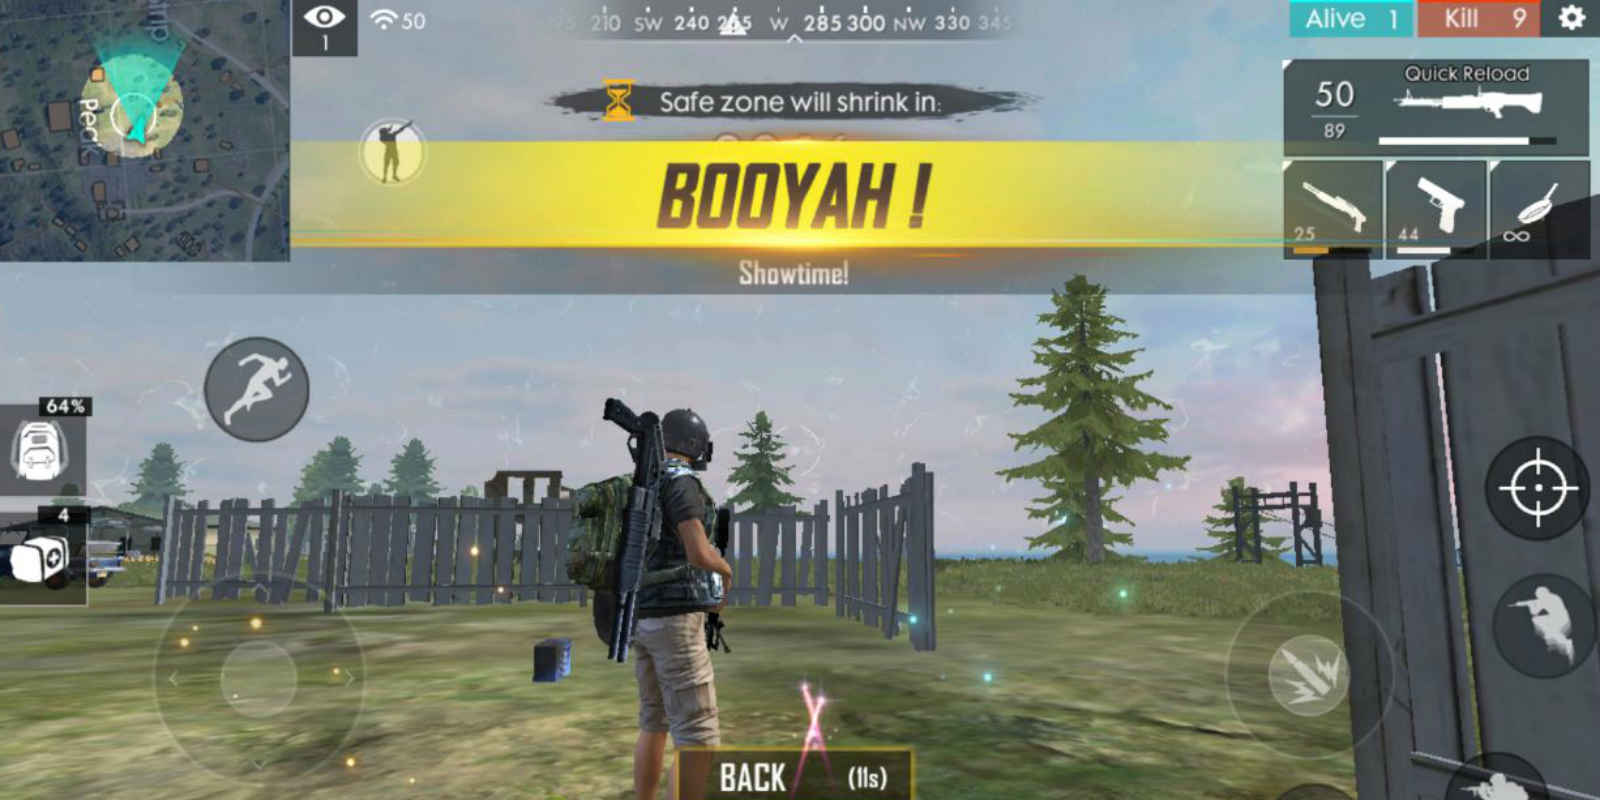 Free Fire Booyah Guide for Battle Royale: Creating Advantage Is Key